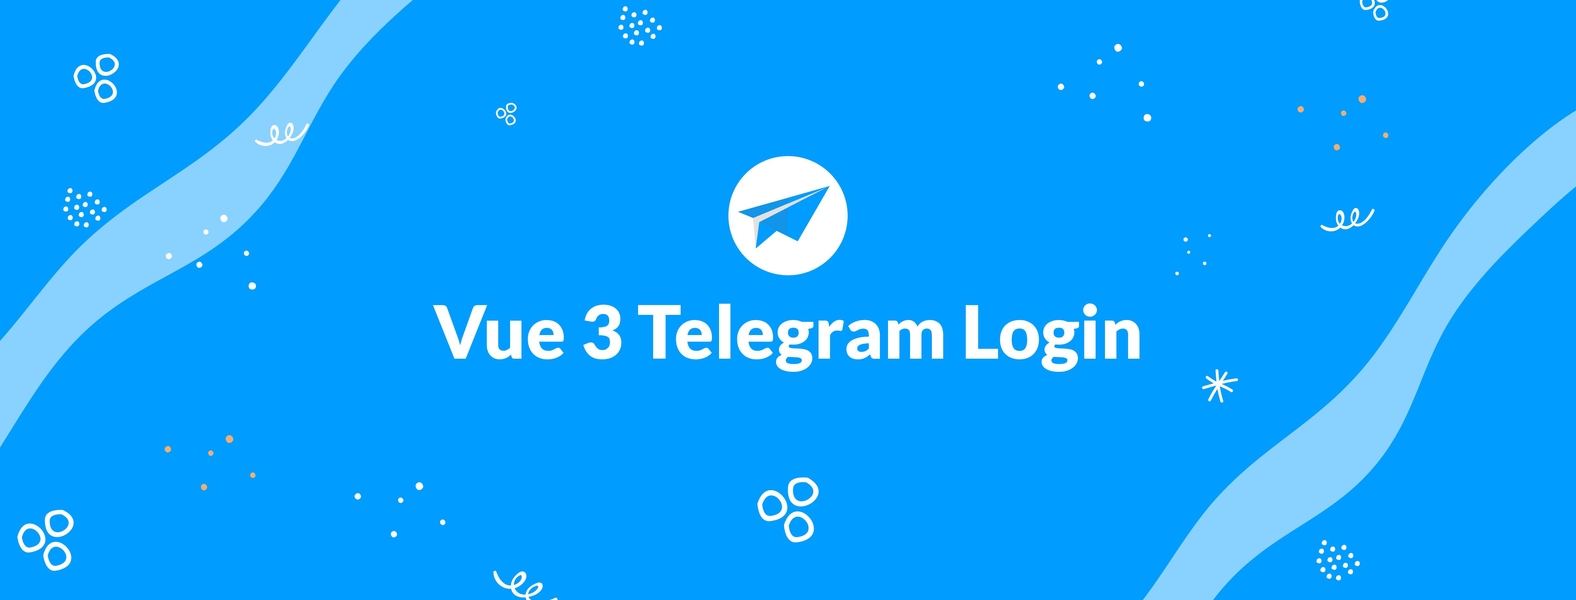 A Simple Telegram Login Component Made with Vue Js